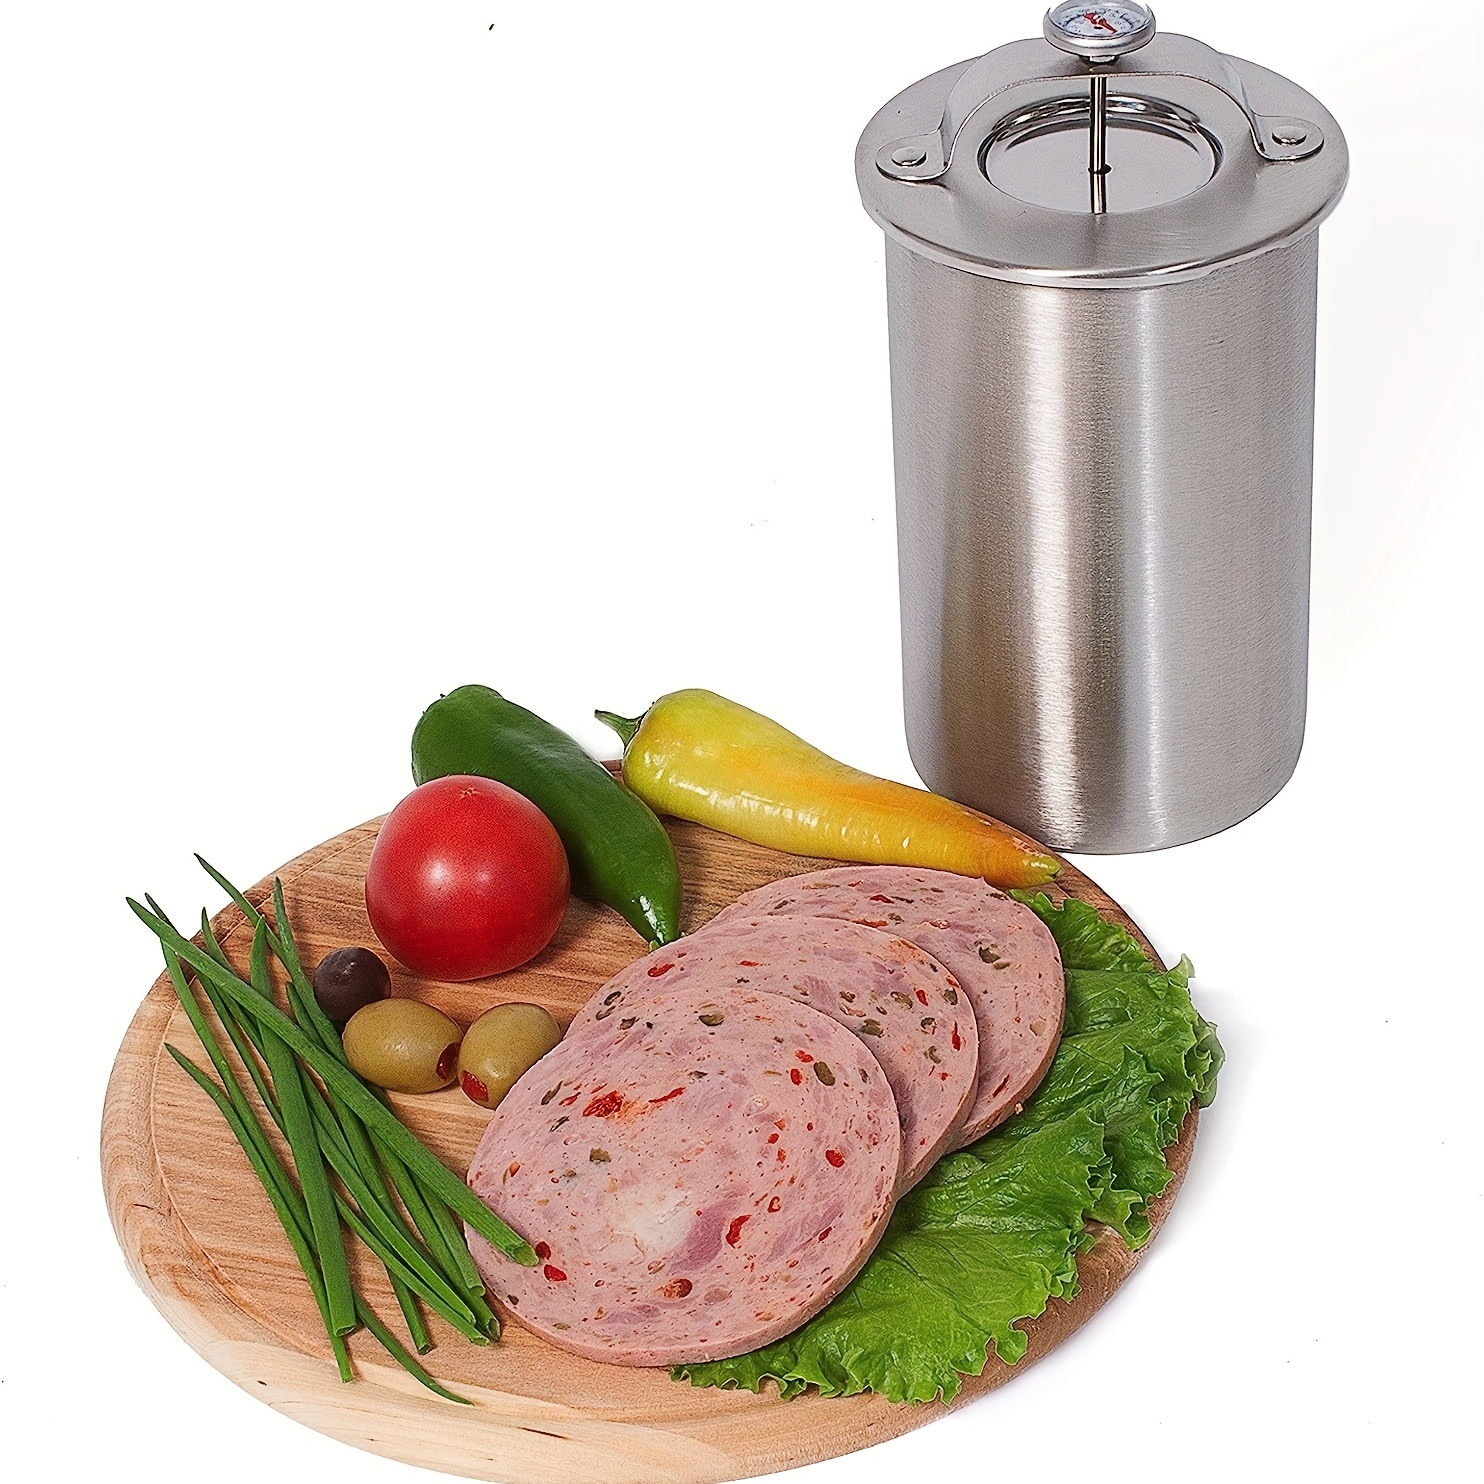 

1pc, 1.3l/43.9oz Ham Maker, Stainless Steel Meat Press For Making Healthy Homemade Deli Meat, Kitchen Bacon Meat Pressure Cookers Boiler Pot Pan Stove With Thermometer And Cooking Bags